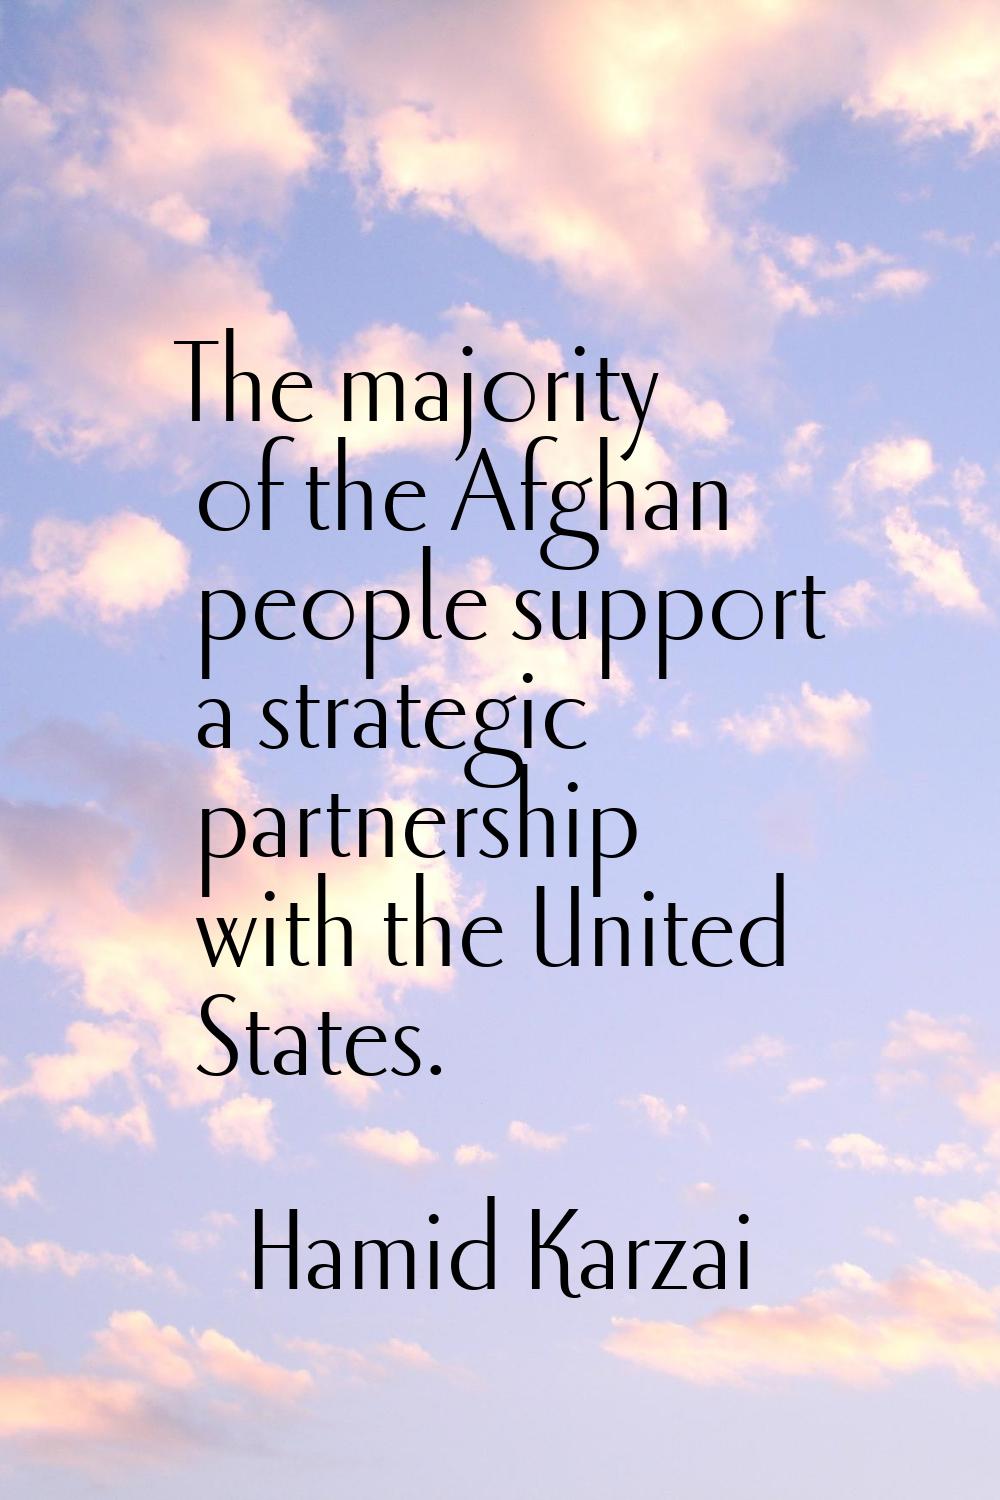 The majority of the Afghan people support a strategic partnership with the United States.